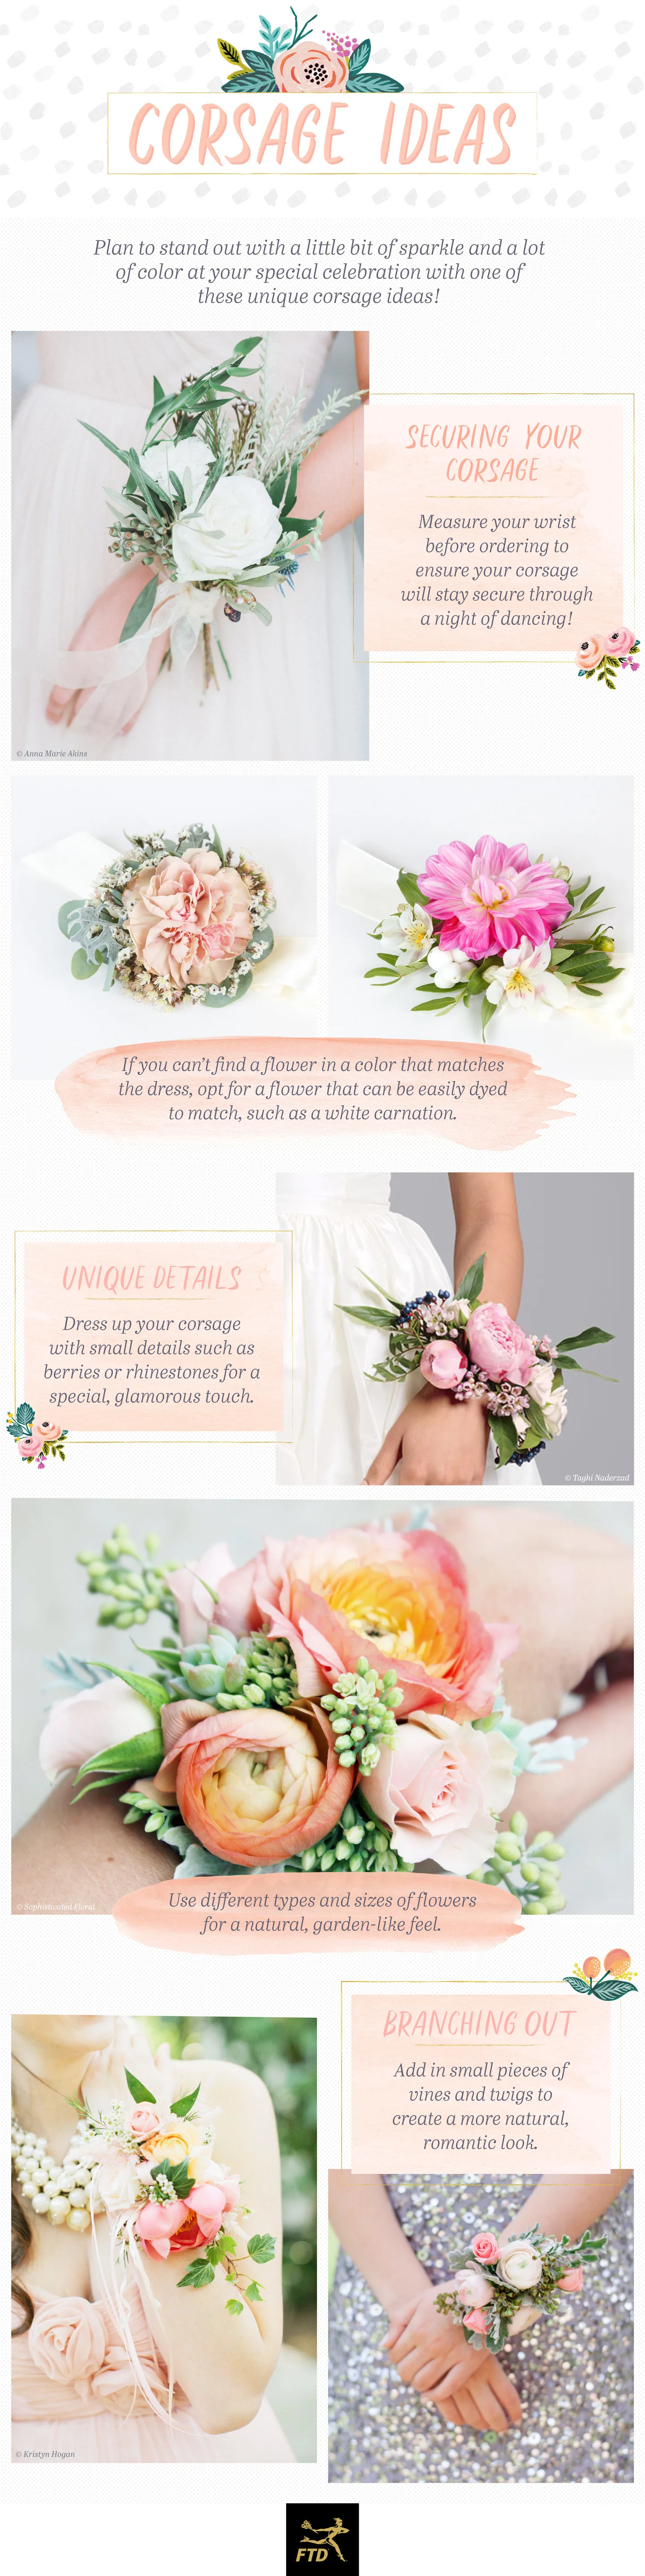 16 Boutonniere and Corsage Ideas